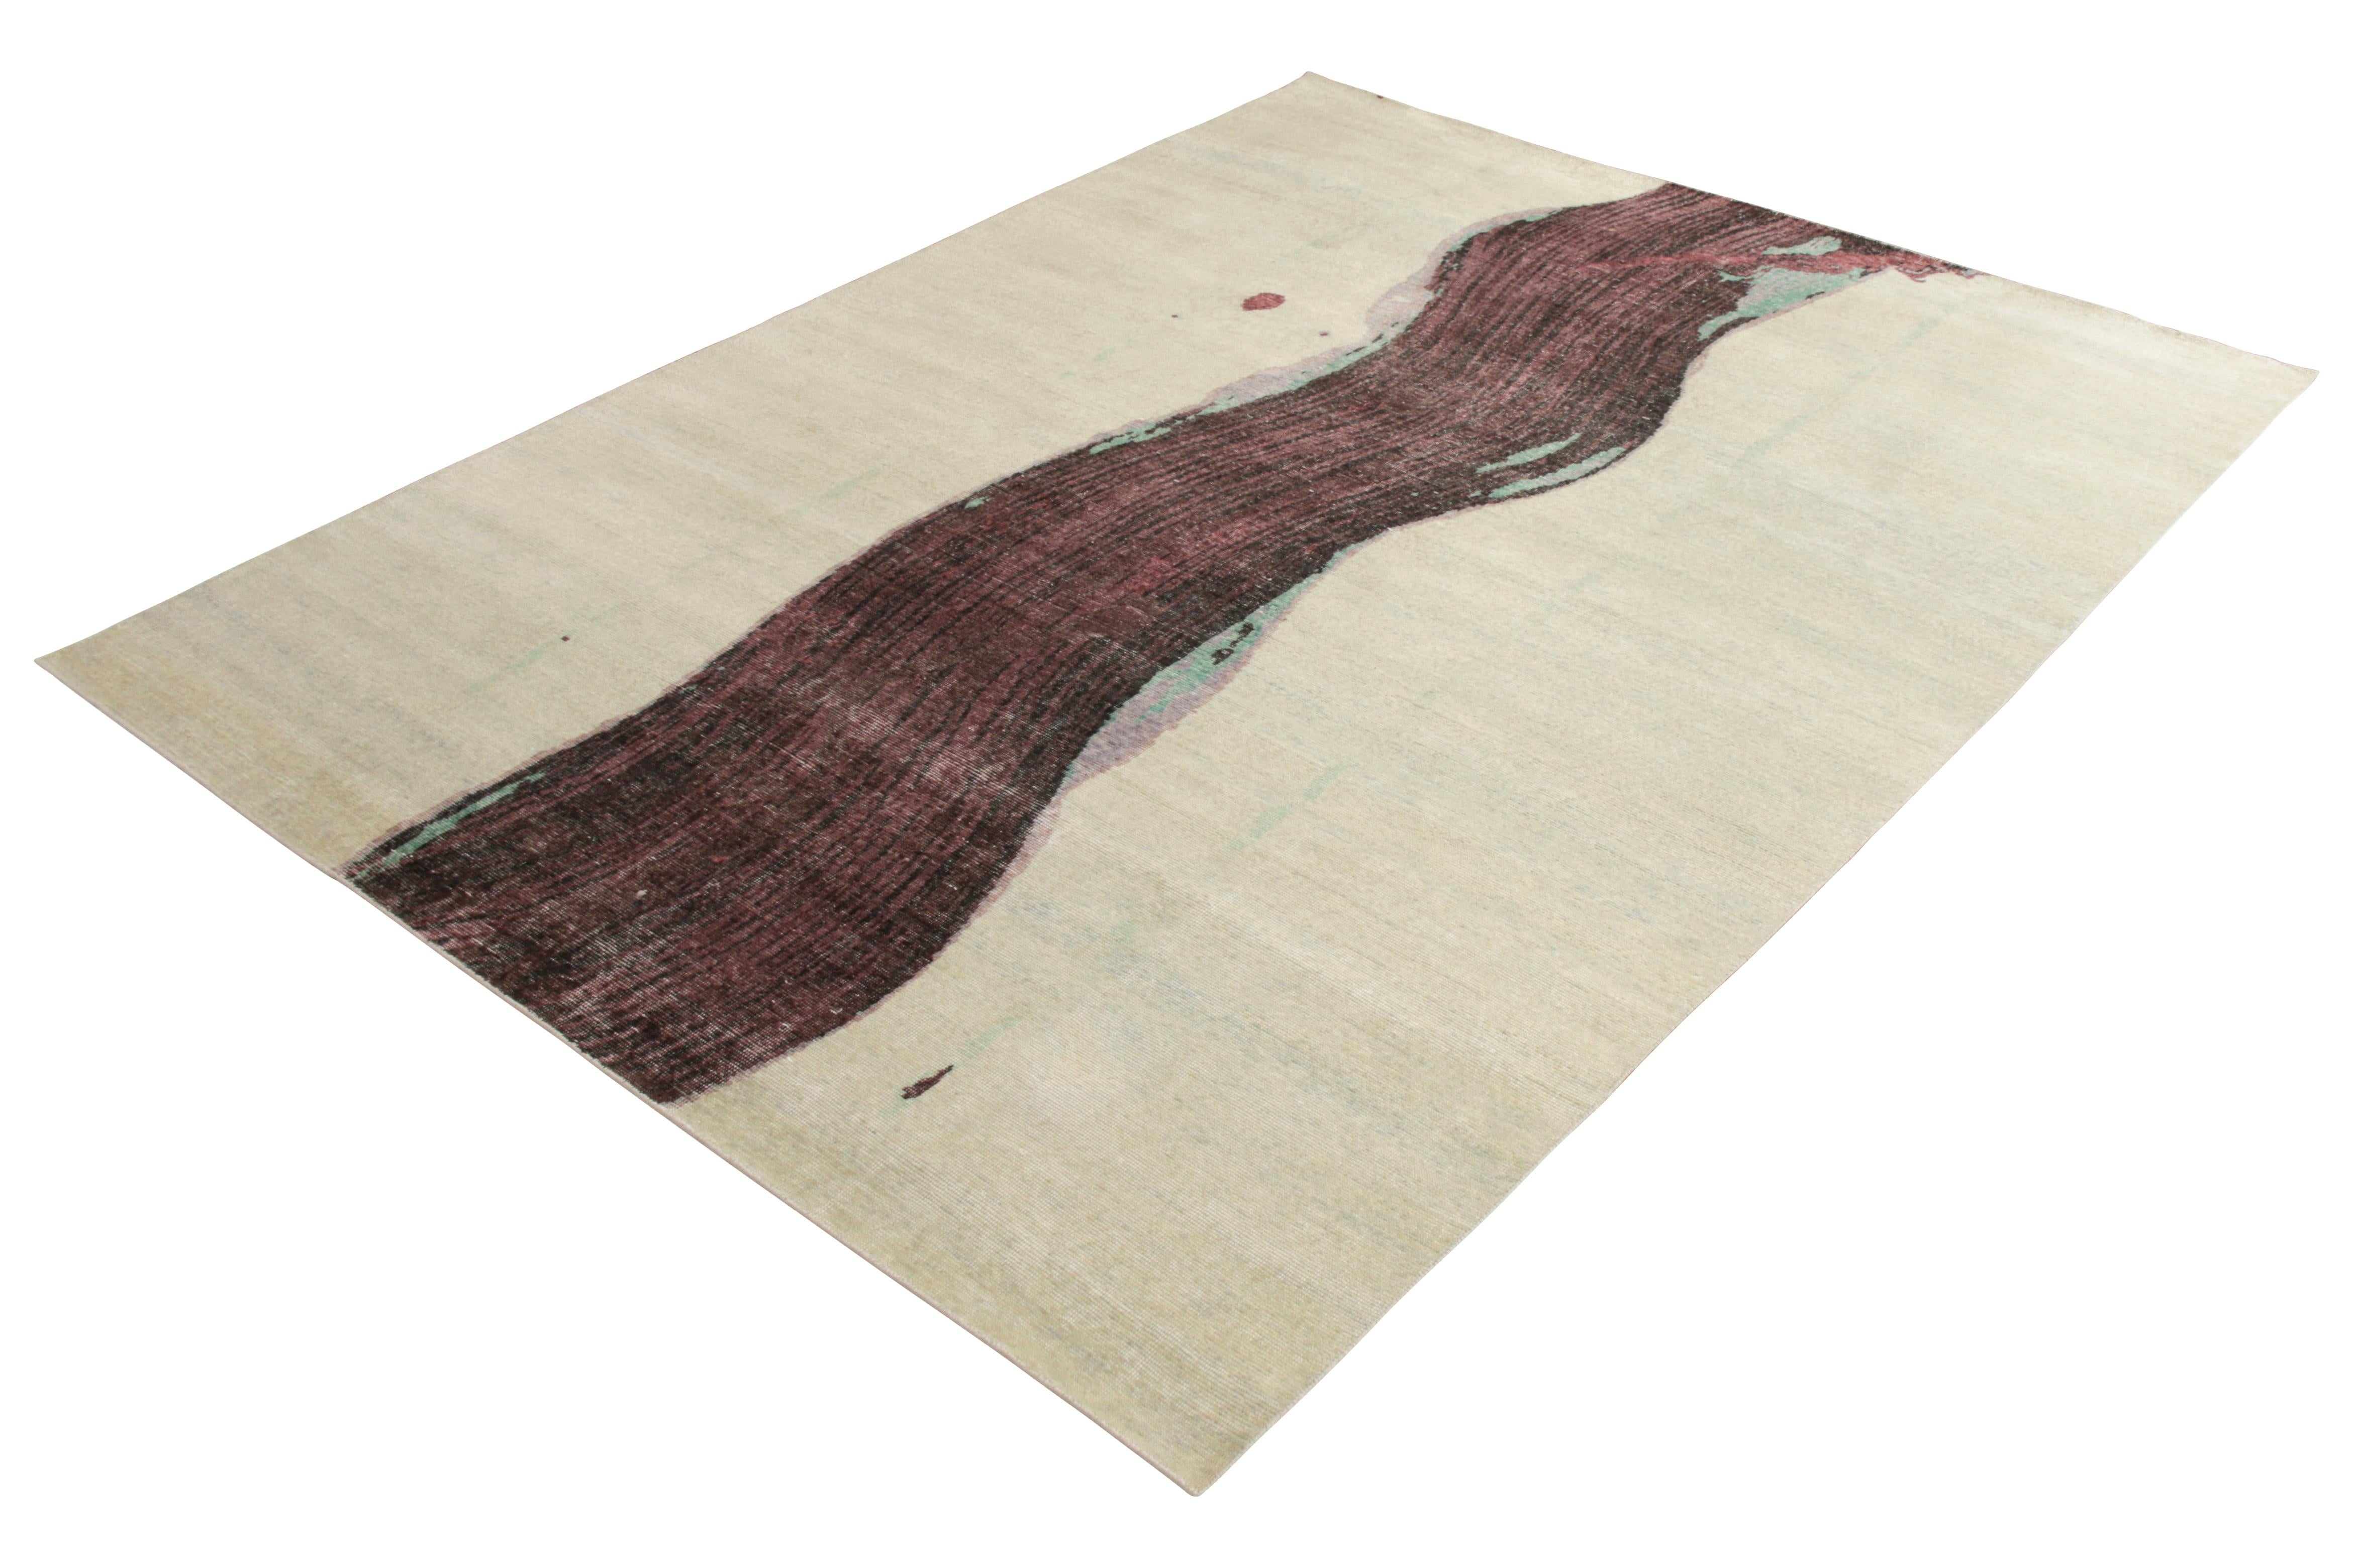 Representing the diverse archive of cultural patterns recaptured in the Homage Collection by Rug & Kilim, this modern rug enjoys a comfortable wash creating the aesthetic of shabby-chic, distressed look unique to the proprietary blend of hand